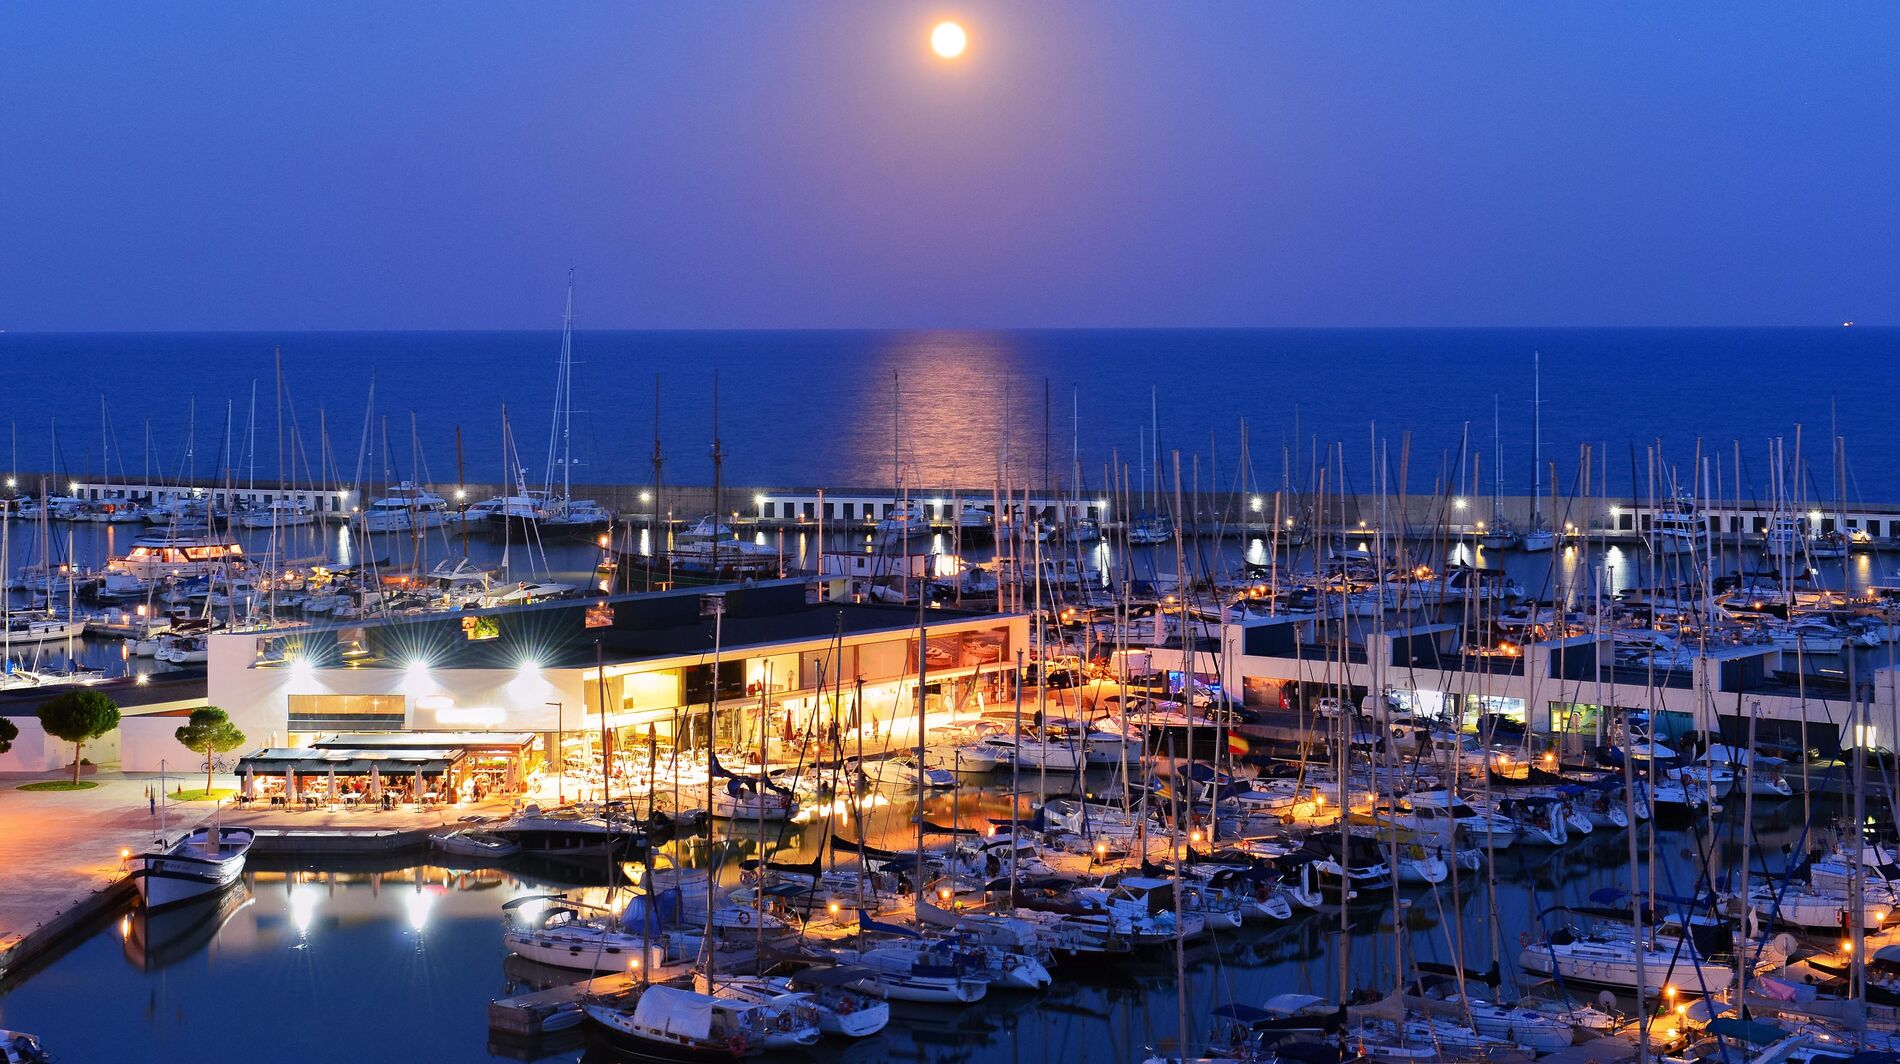 yachts-at-night-in-spain